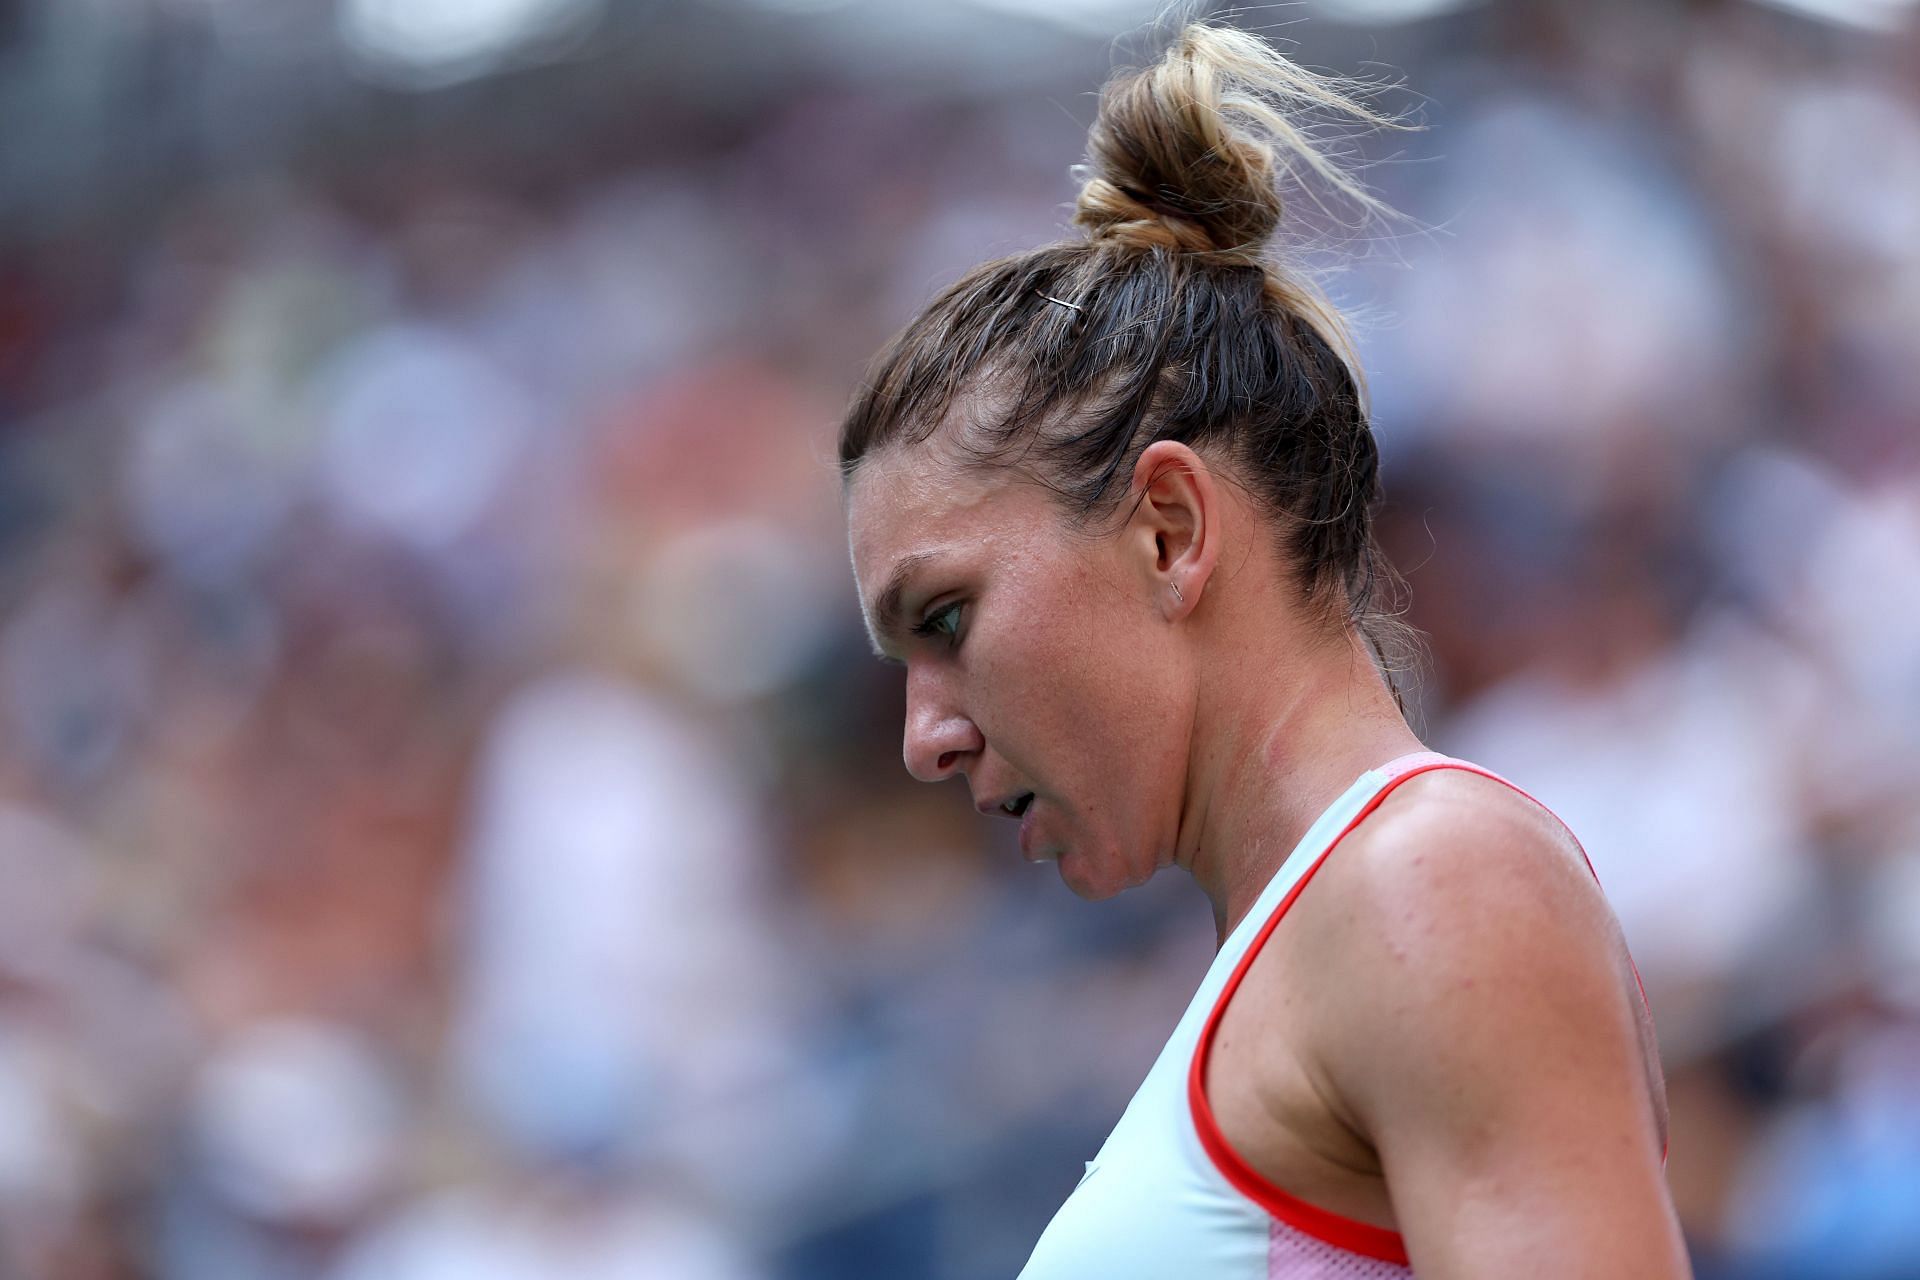 Simona Halep at the 2022 US Open - Day 1